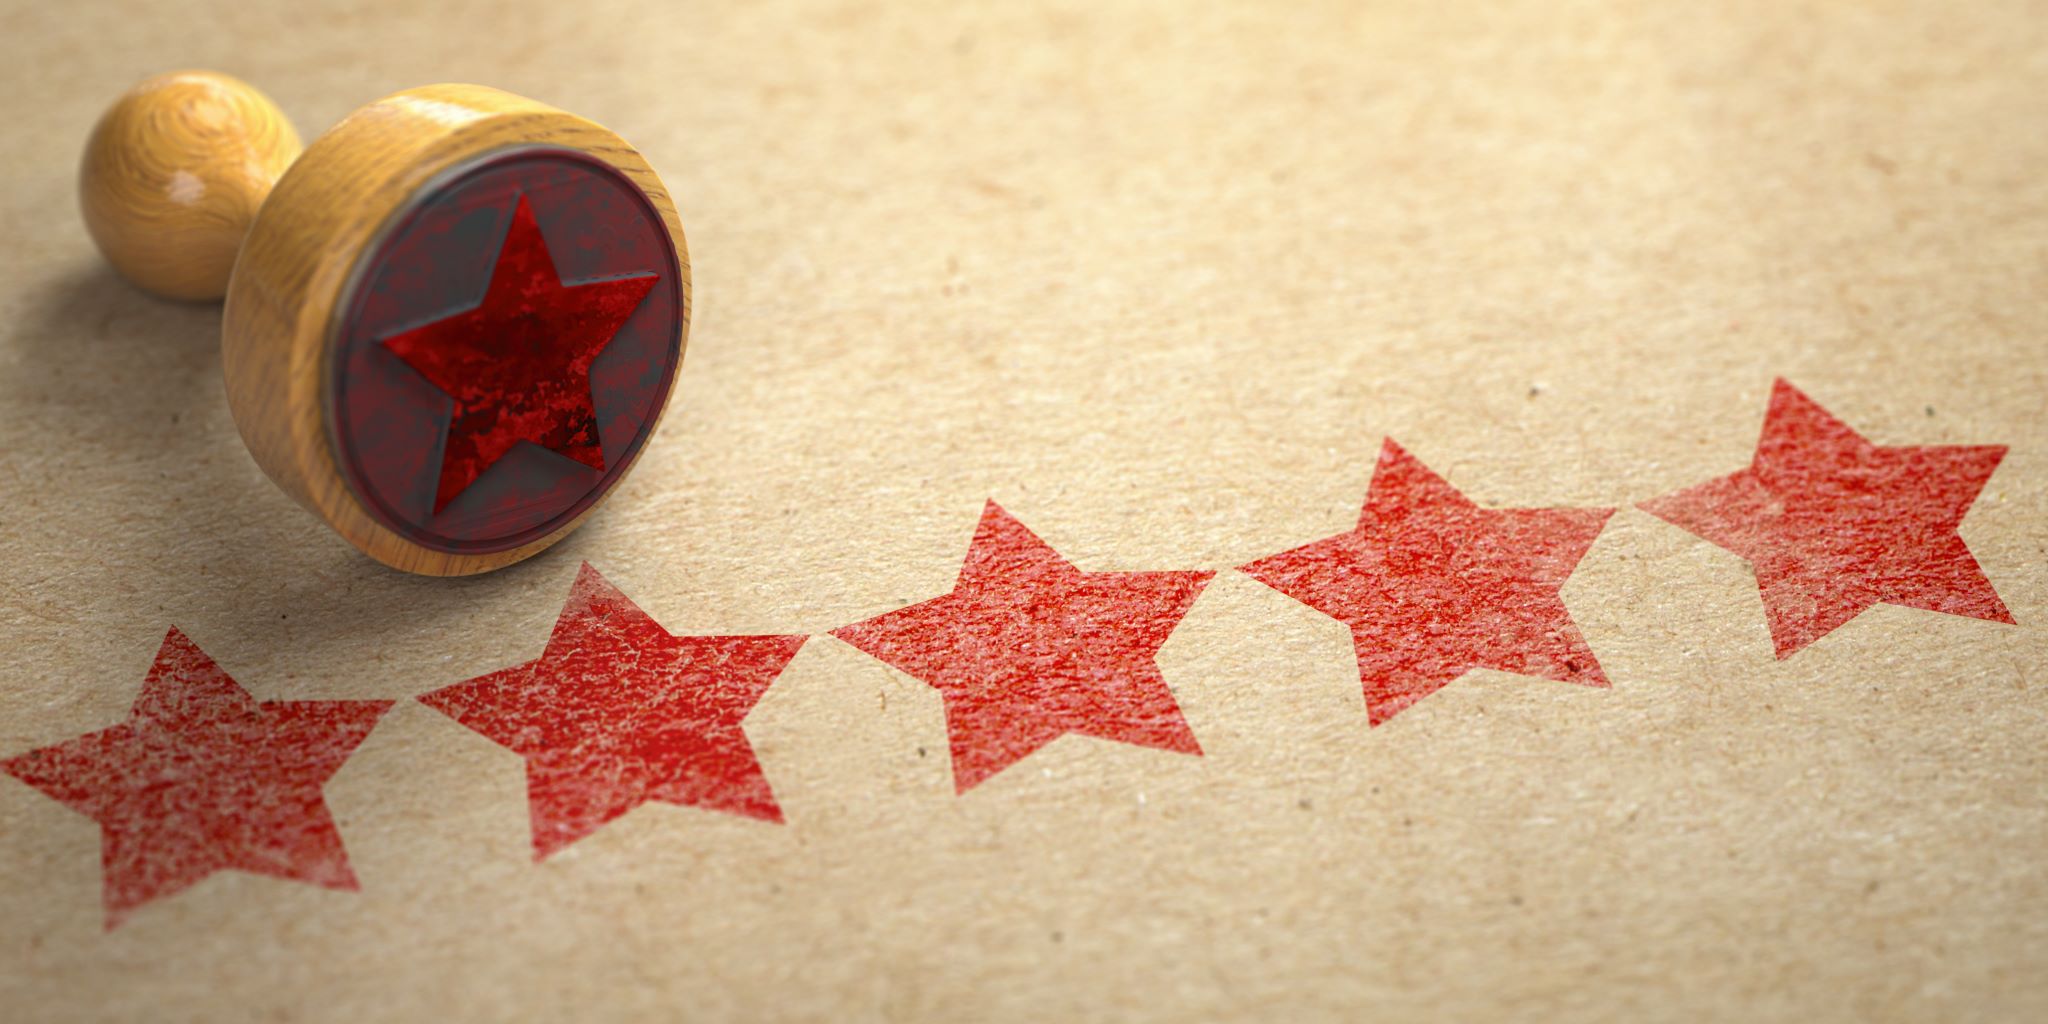 Positive review examples for companies: a guide